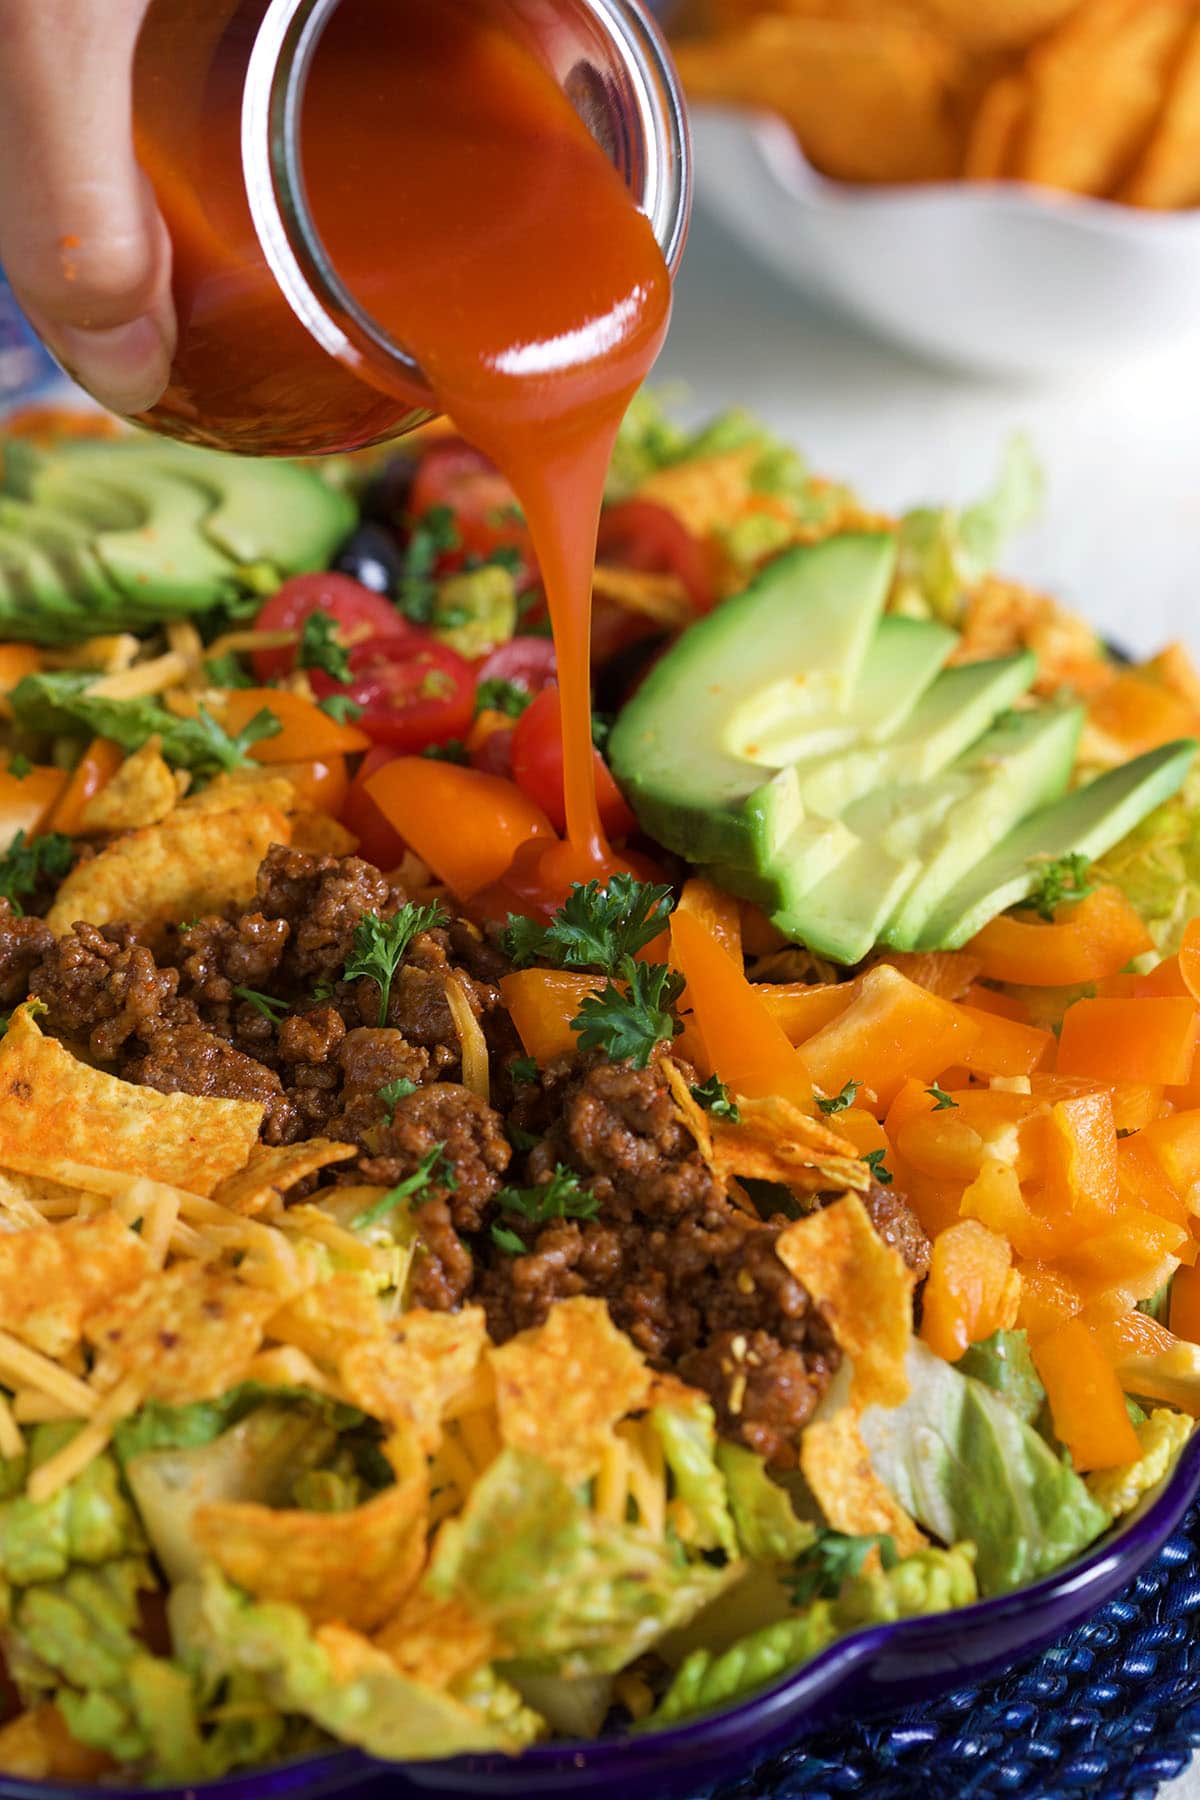 Salad dressing is being poured over the taco salad. 